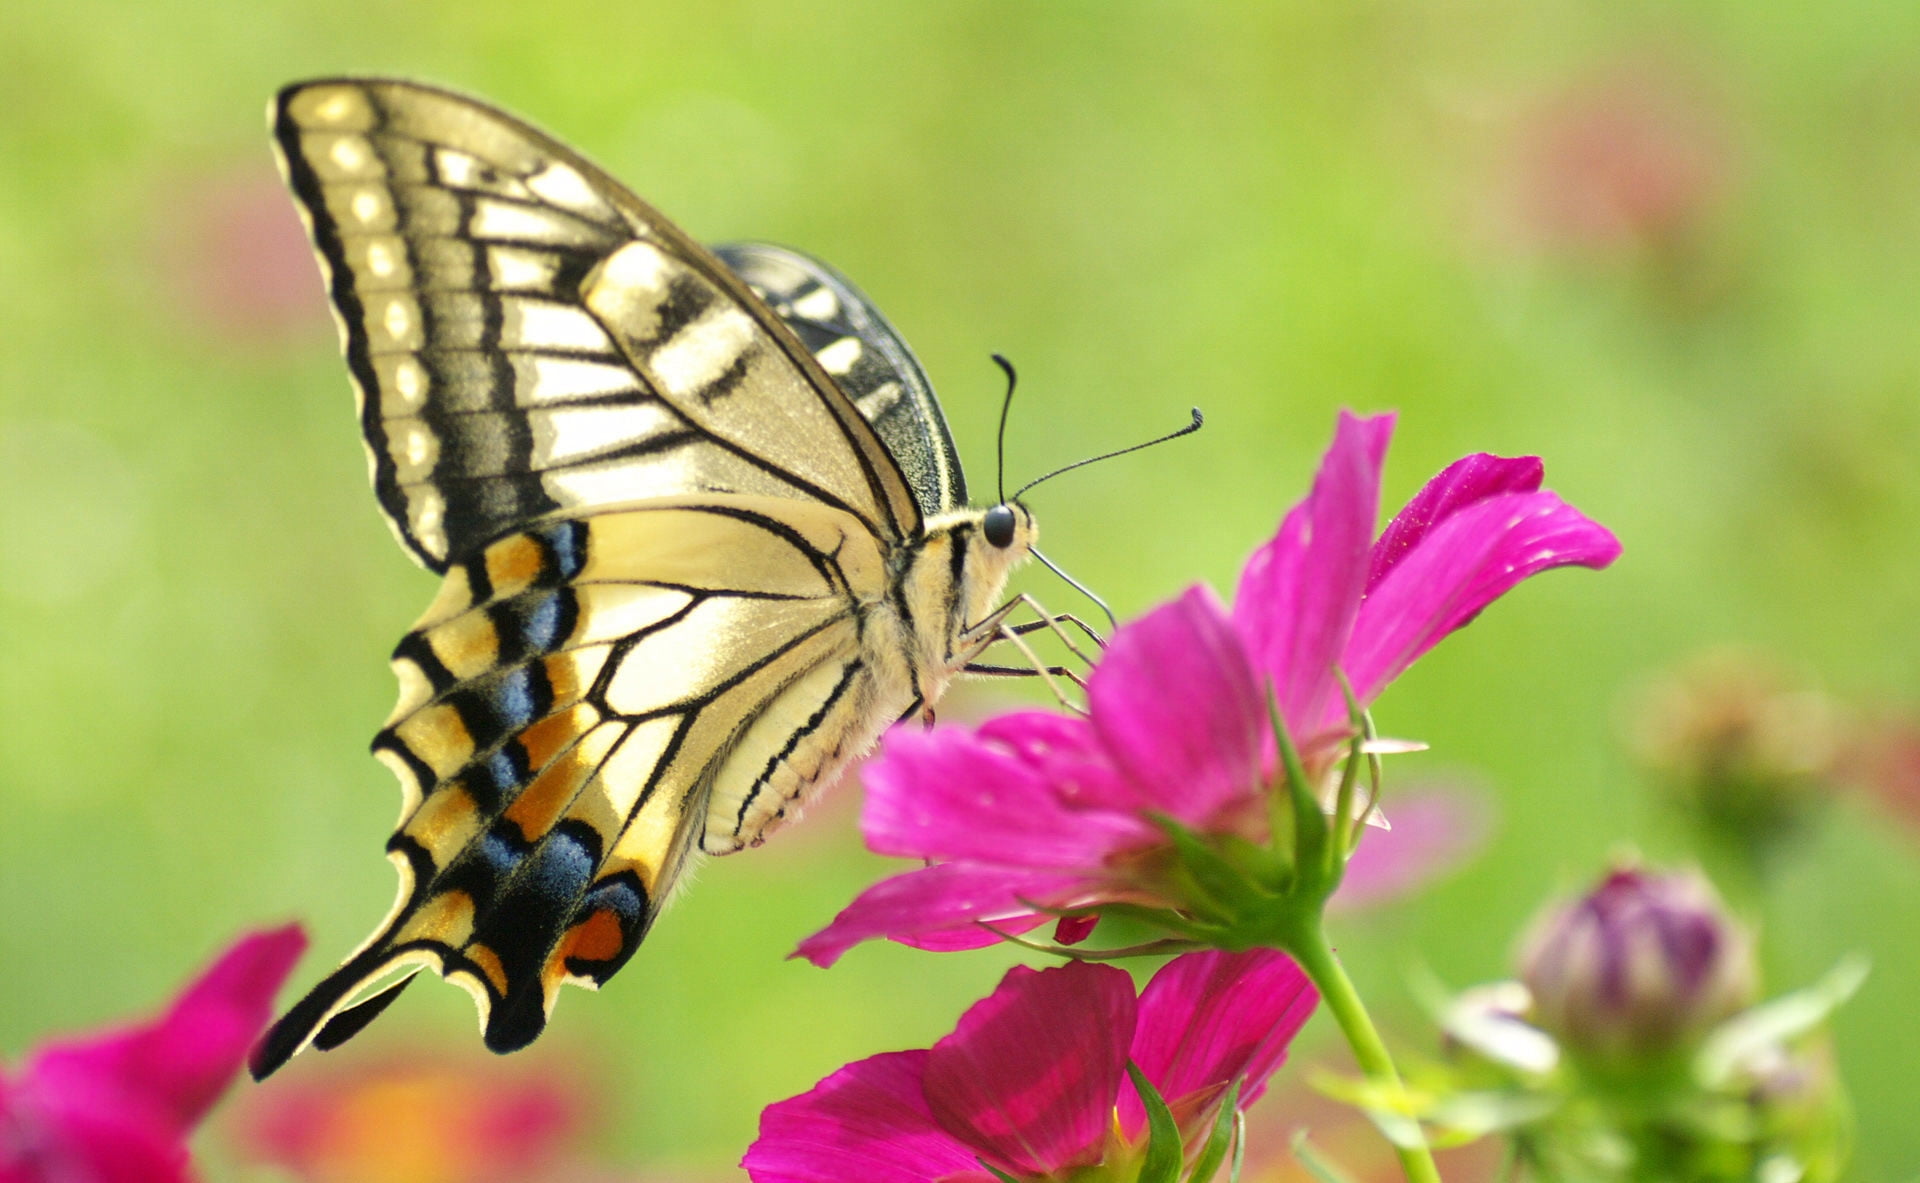 Tiger Swallowtail butterfly perched on purple petaled flower closeup photography during daytime